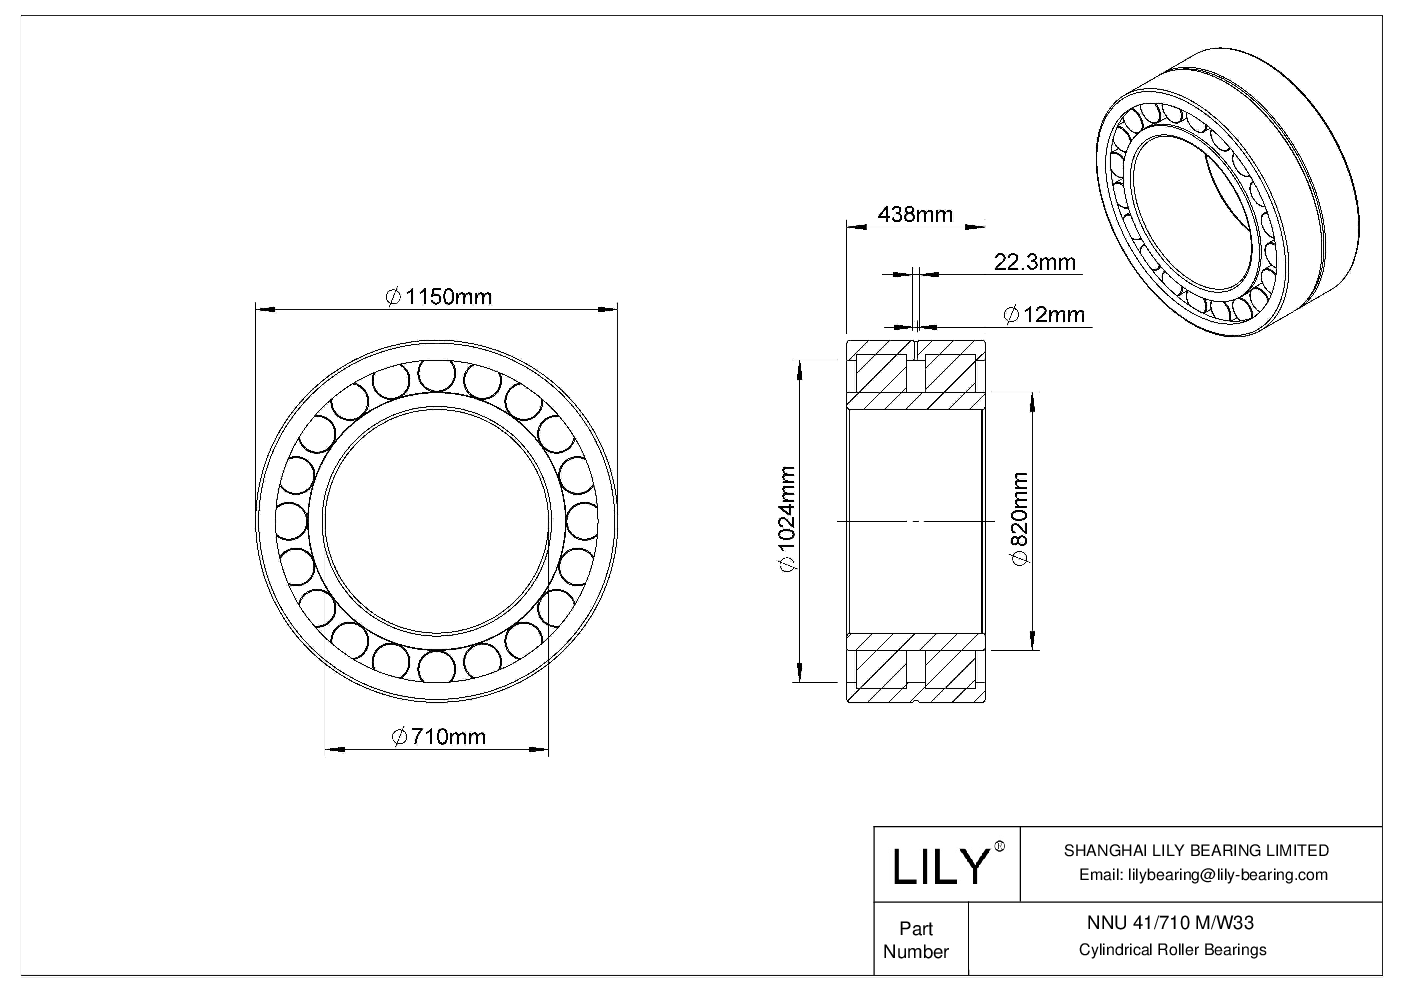 NNU 41/710 M/W33 Double Row Cylindrical Roller Bearings cad drawing